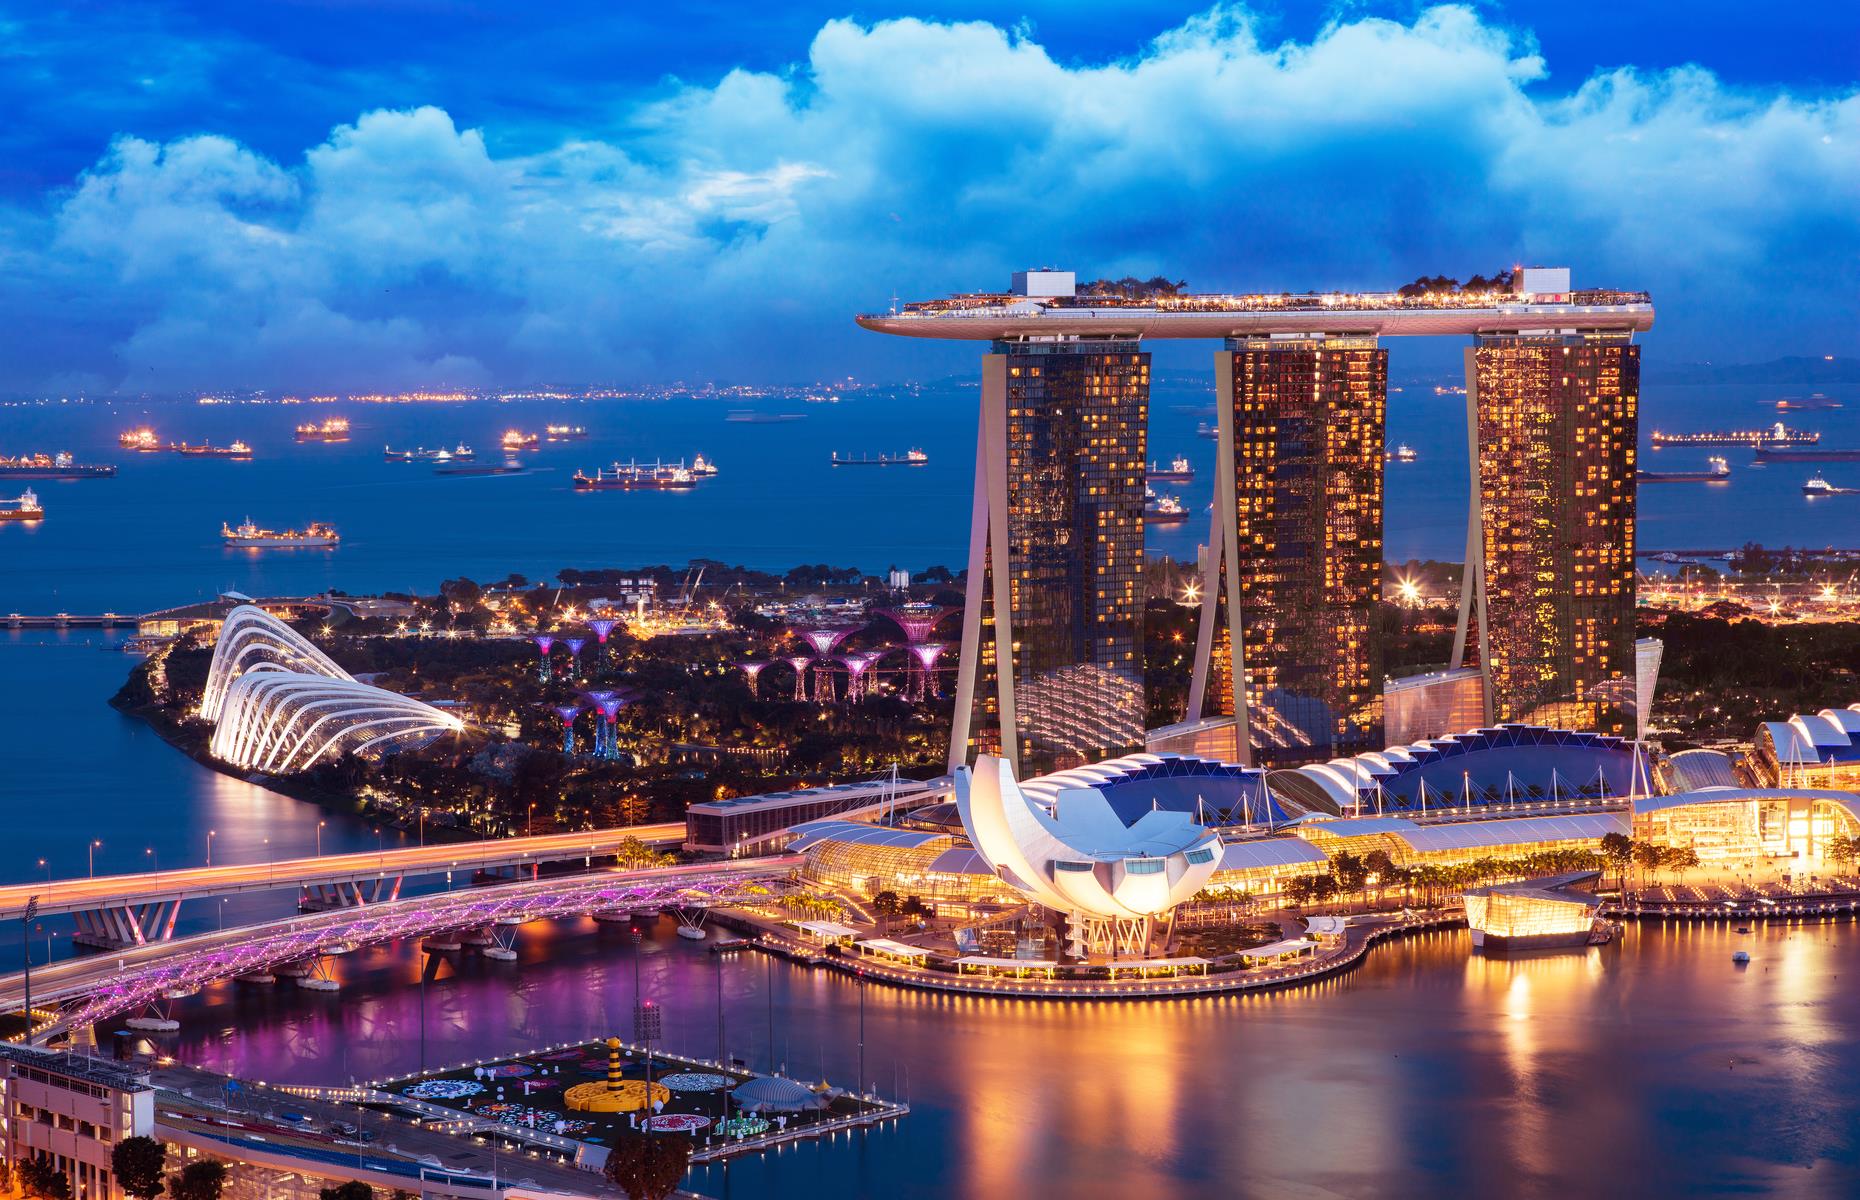 Singapore: 5.5% of the population